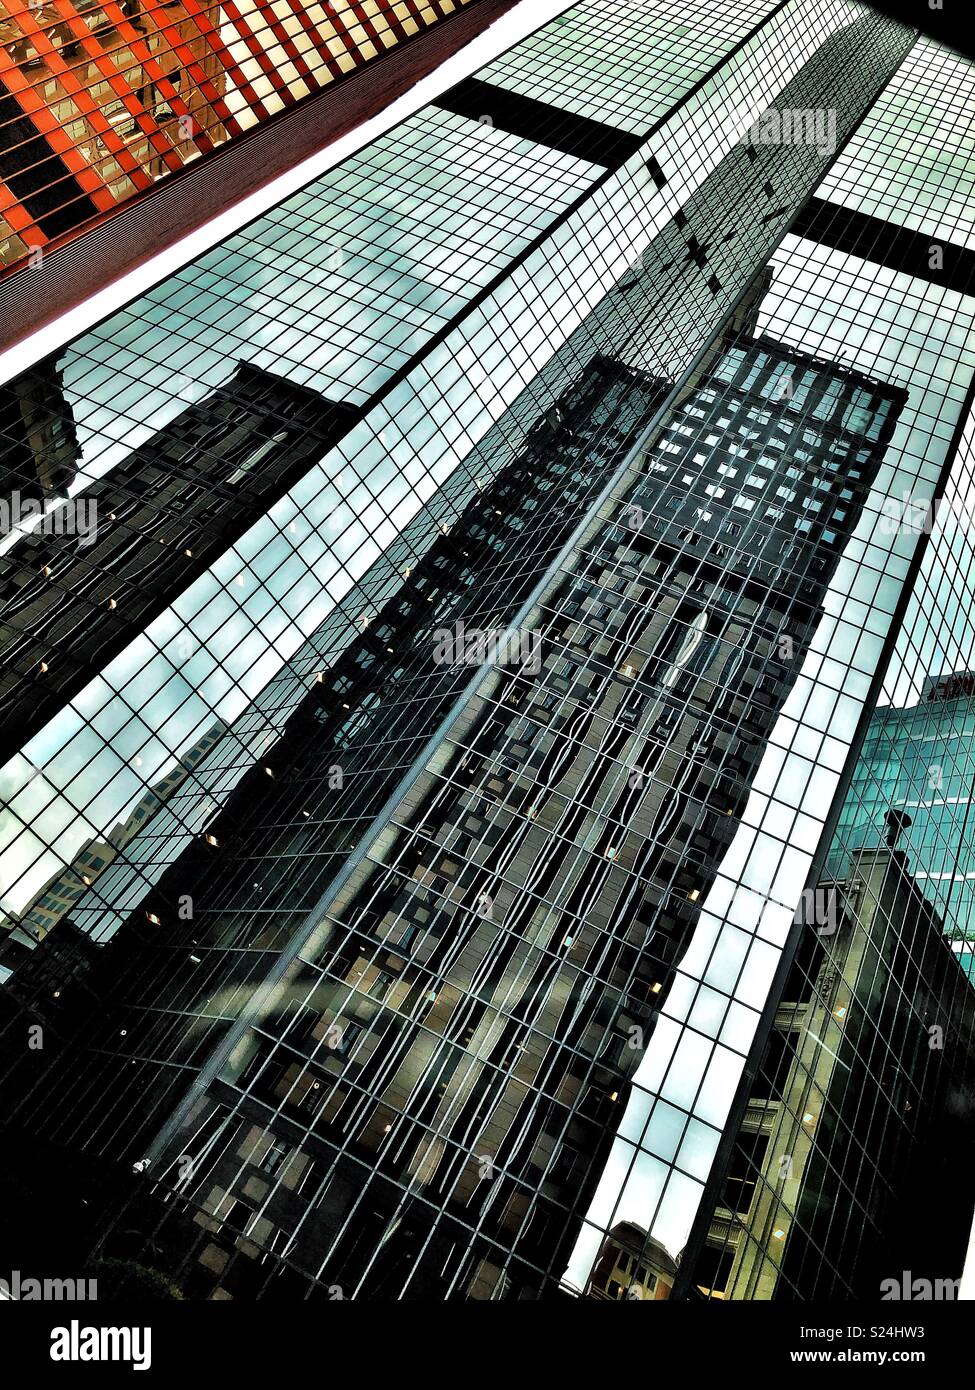 An abstract image of a shiny office building Stock Photo